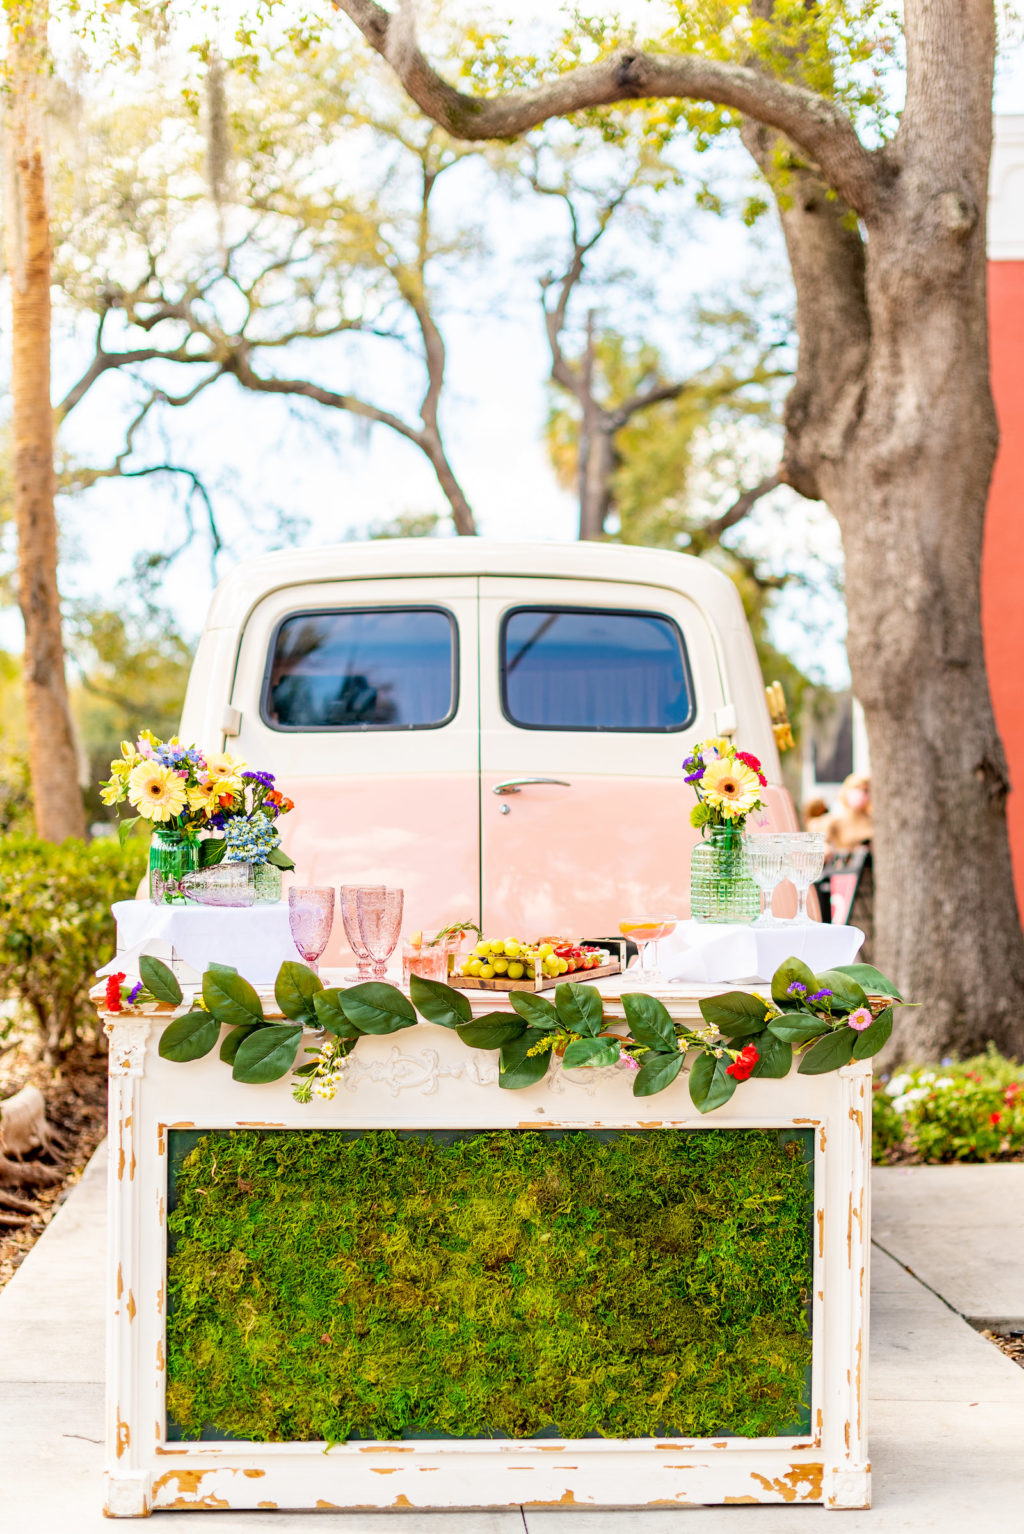 Tampa Wedding Styled Shoot 70's Retro Vintage | Vintage Tap Truck Mobile Bar with Moss Wood Bar and Colorful Vibrant Flowers